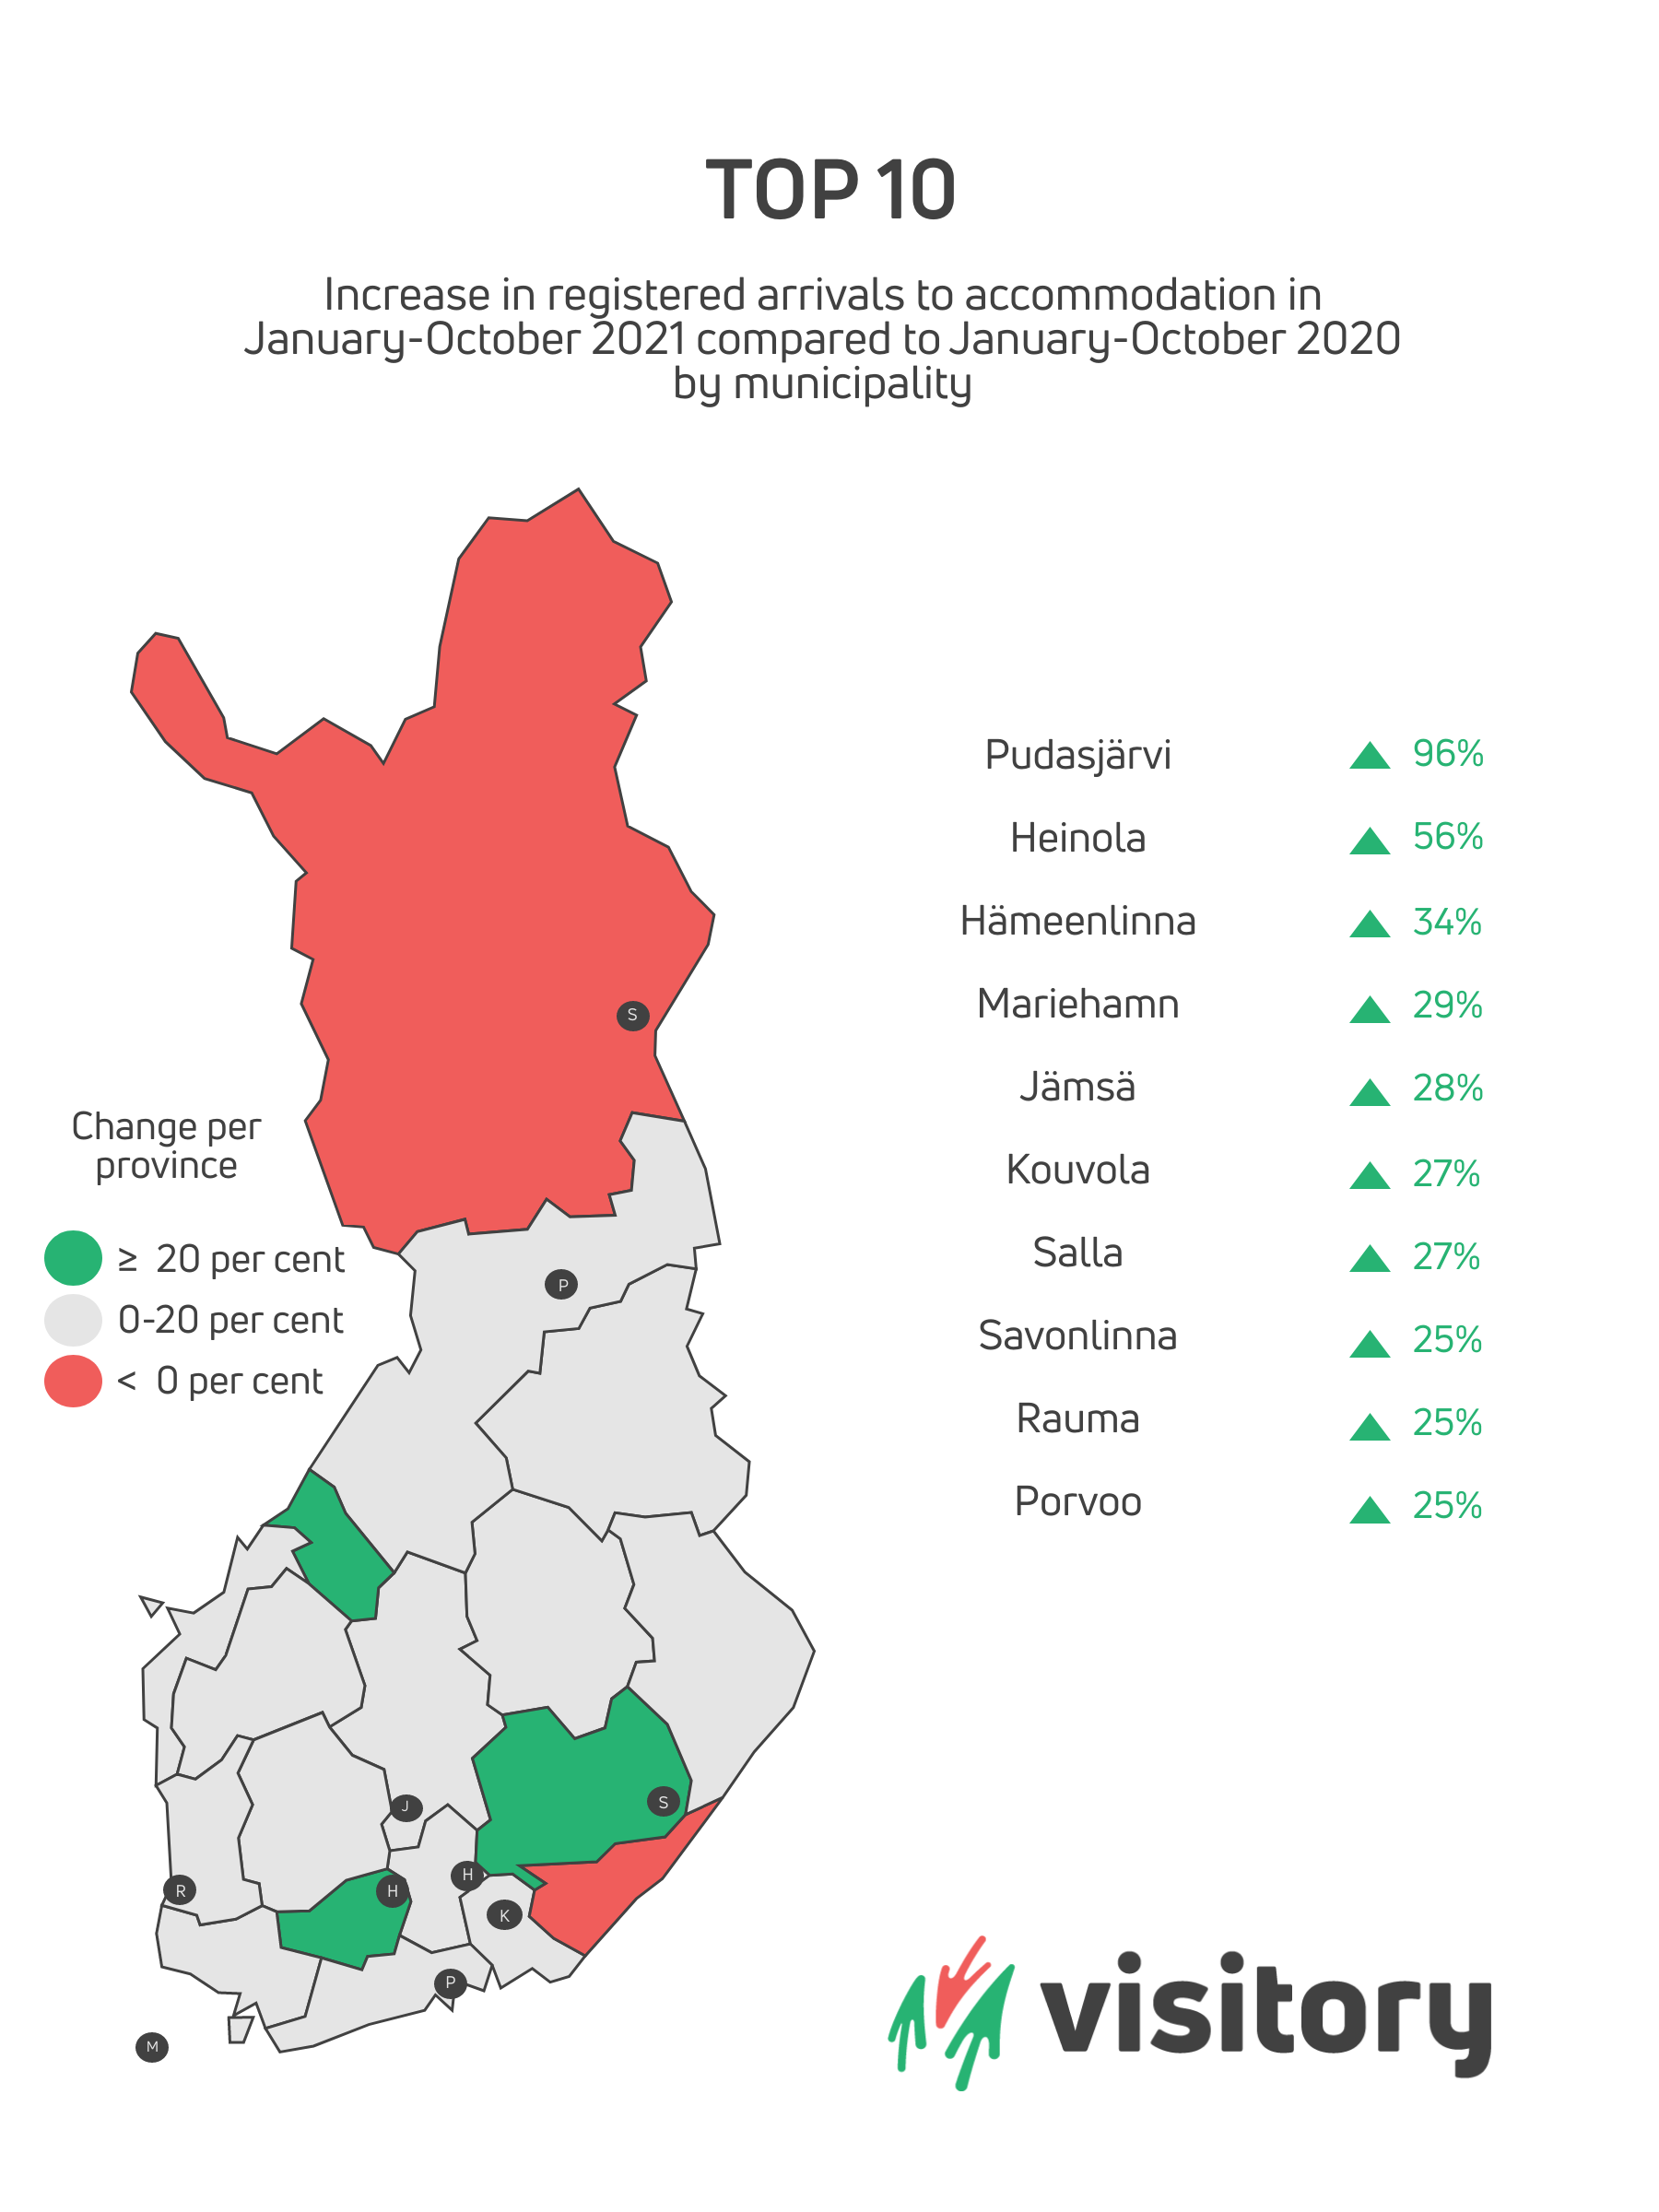 Increase in the registered arrivals to accommodation in January-October 2021 compared to January-October 2020 by municipality